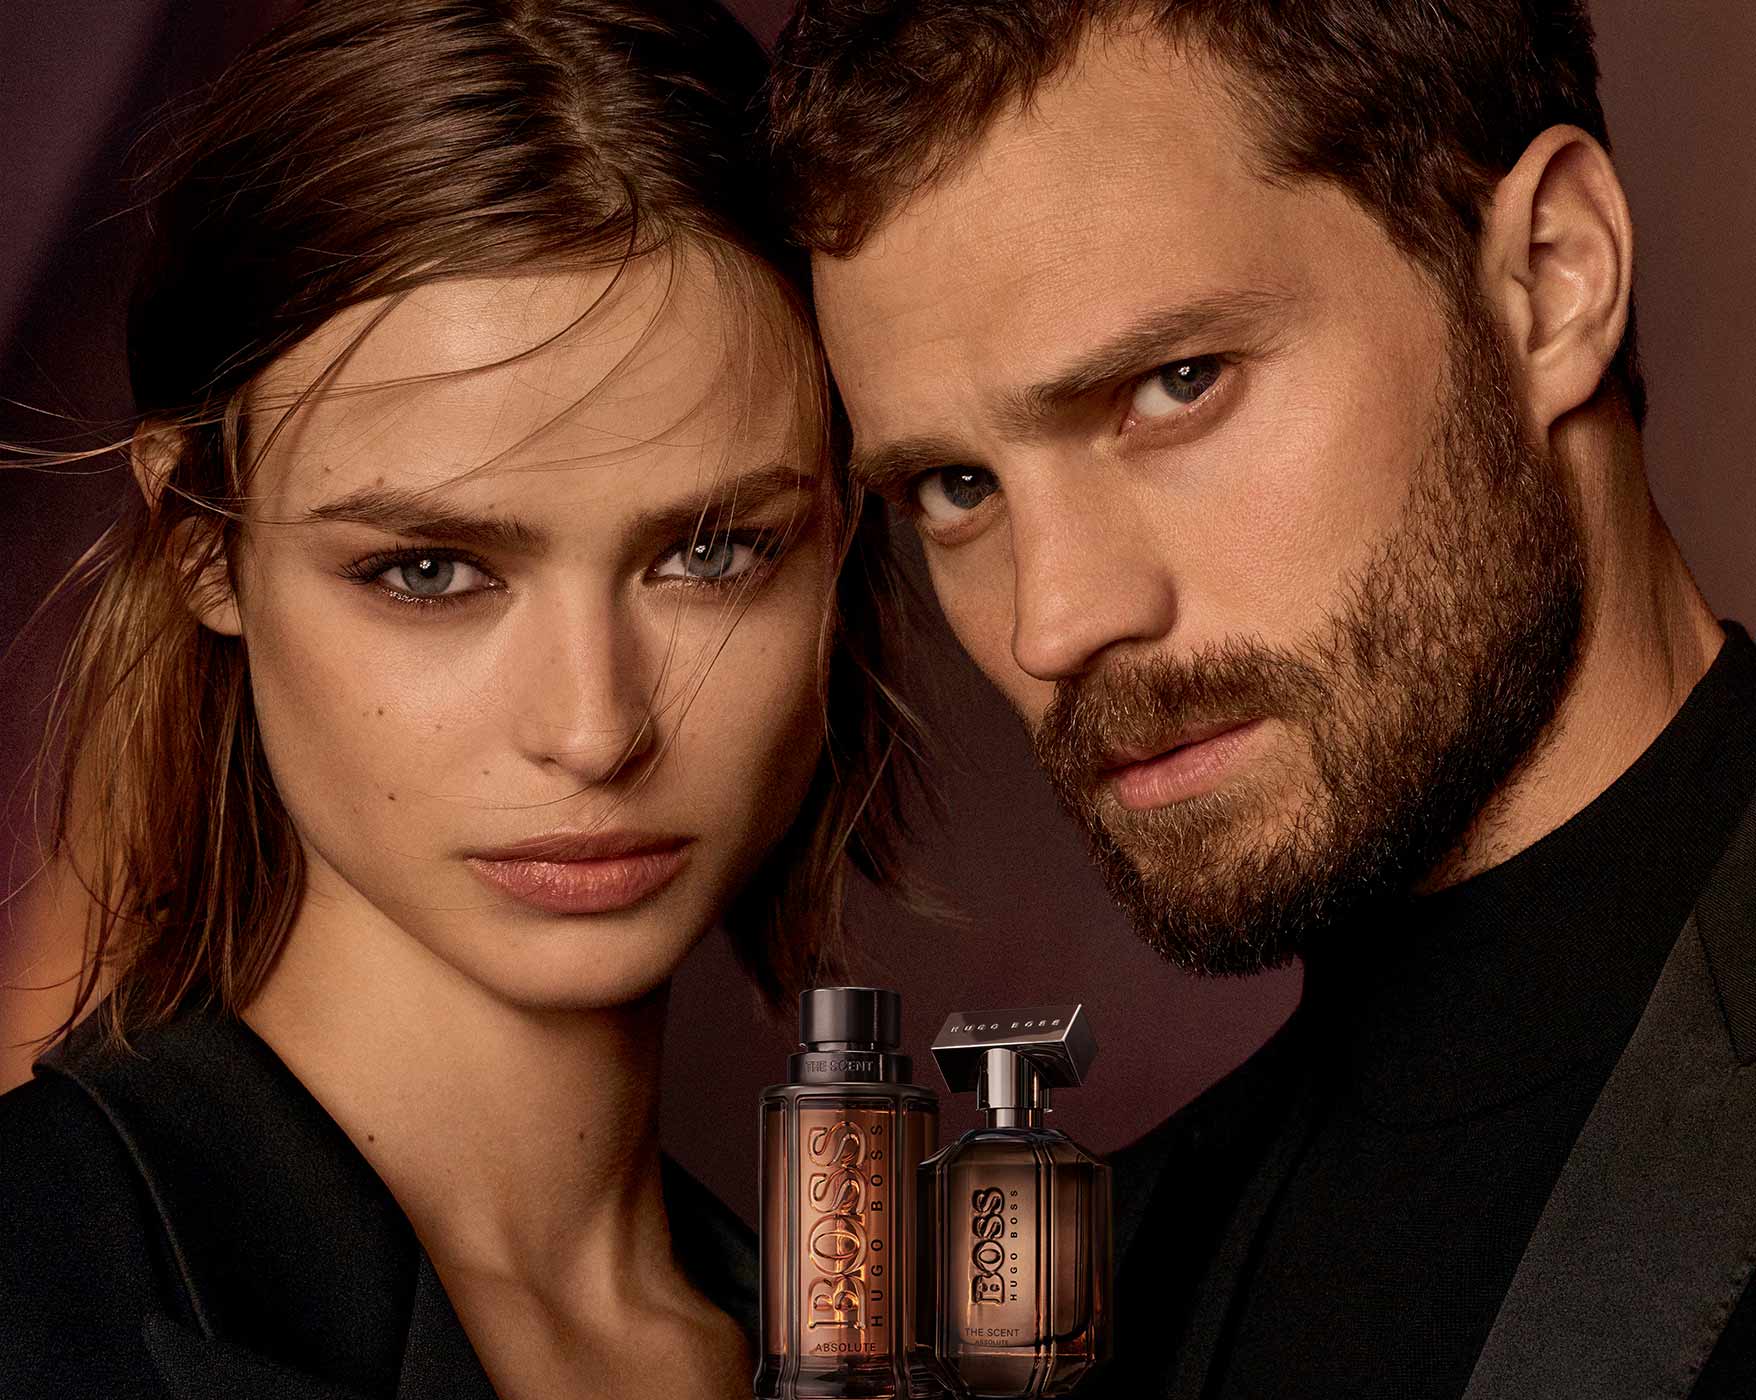 The scent absolute. Хуго босс Сцент Абсолют. Hugo Boss the Scent absolute for her. Hugo Boss the Scent absolute for him.